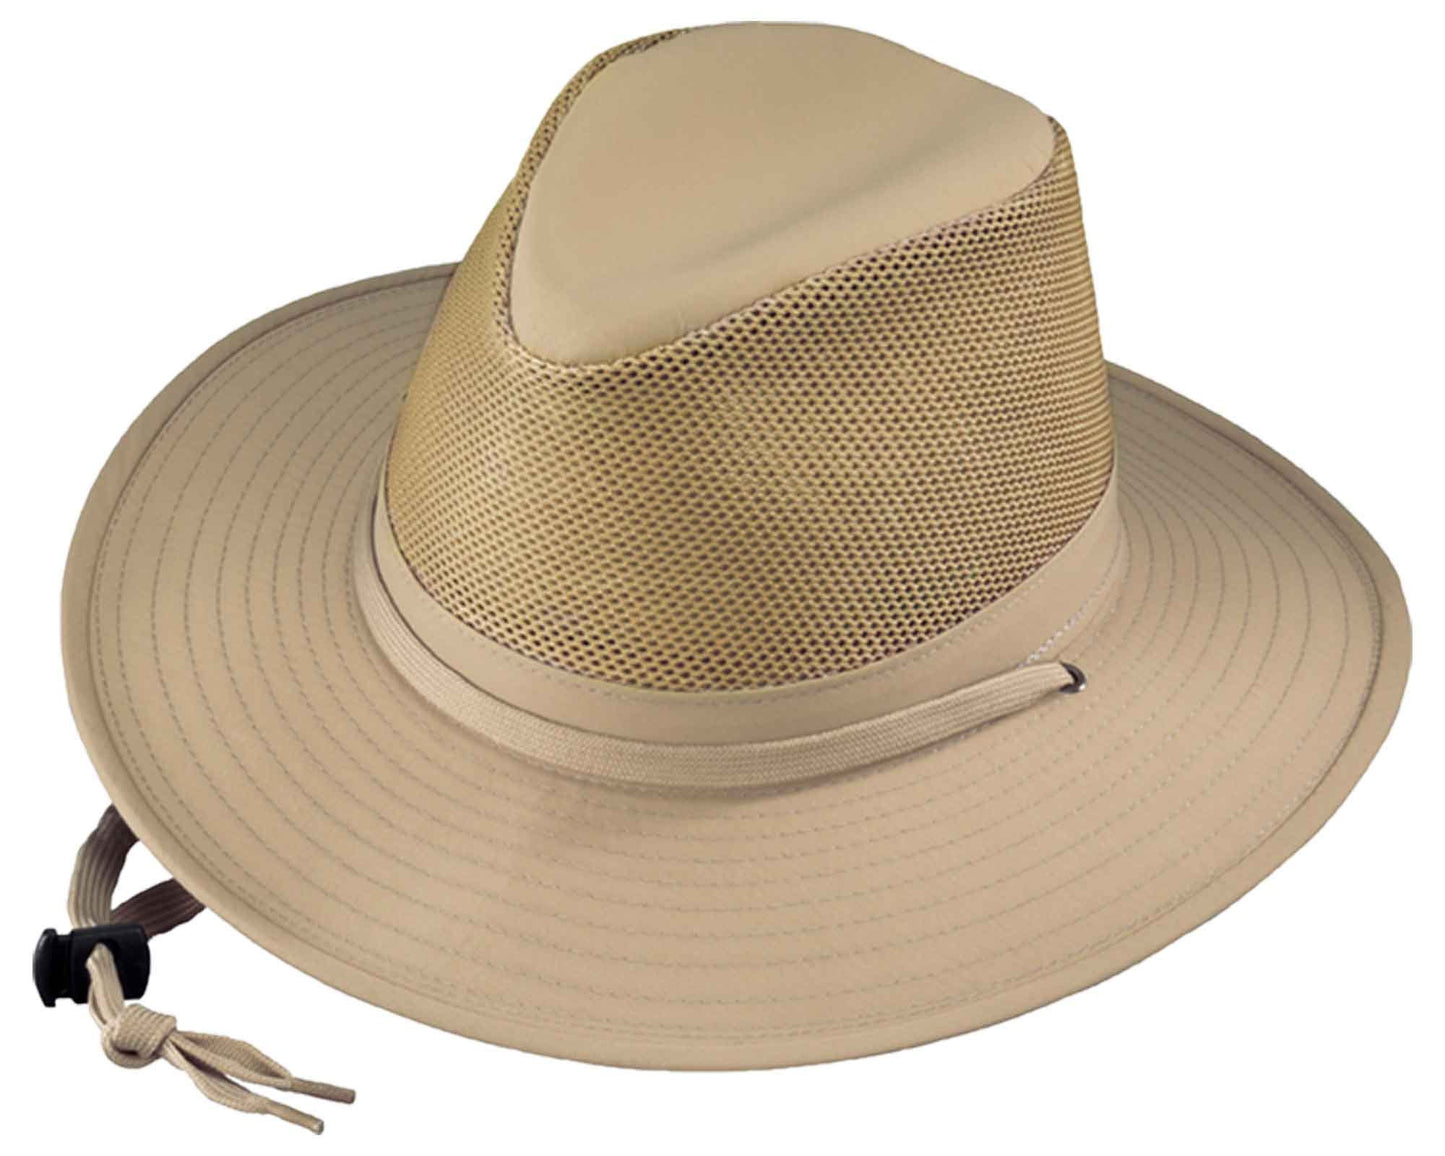 Henschel aussie crushable solaweave mesh outback hat